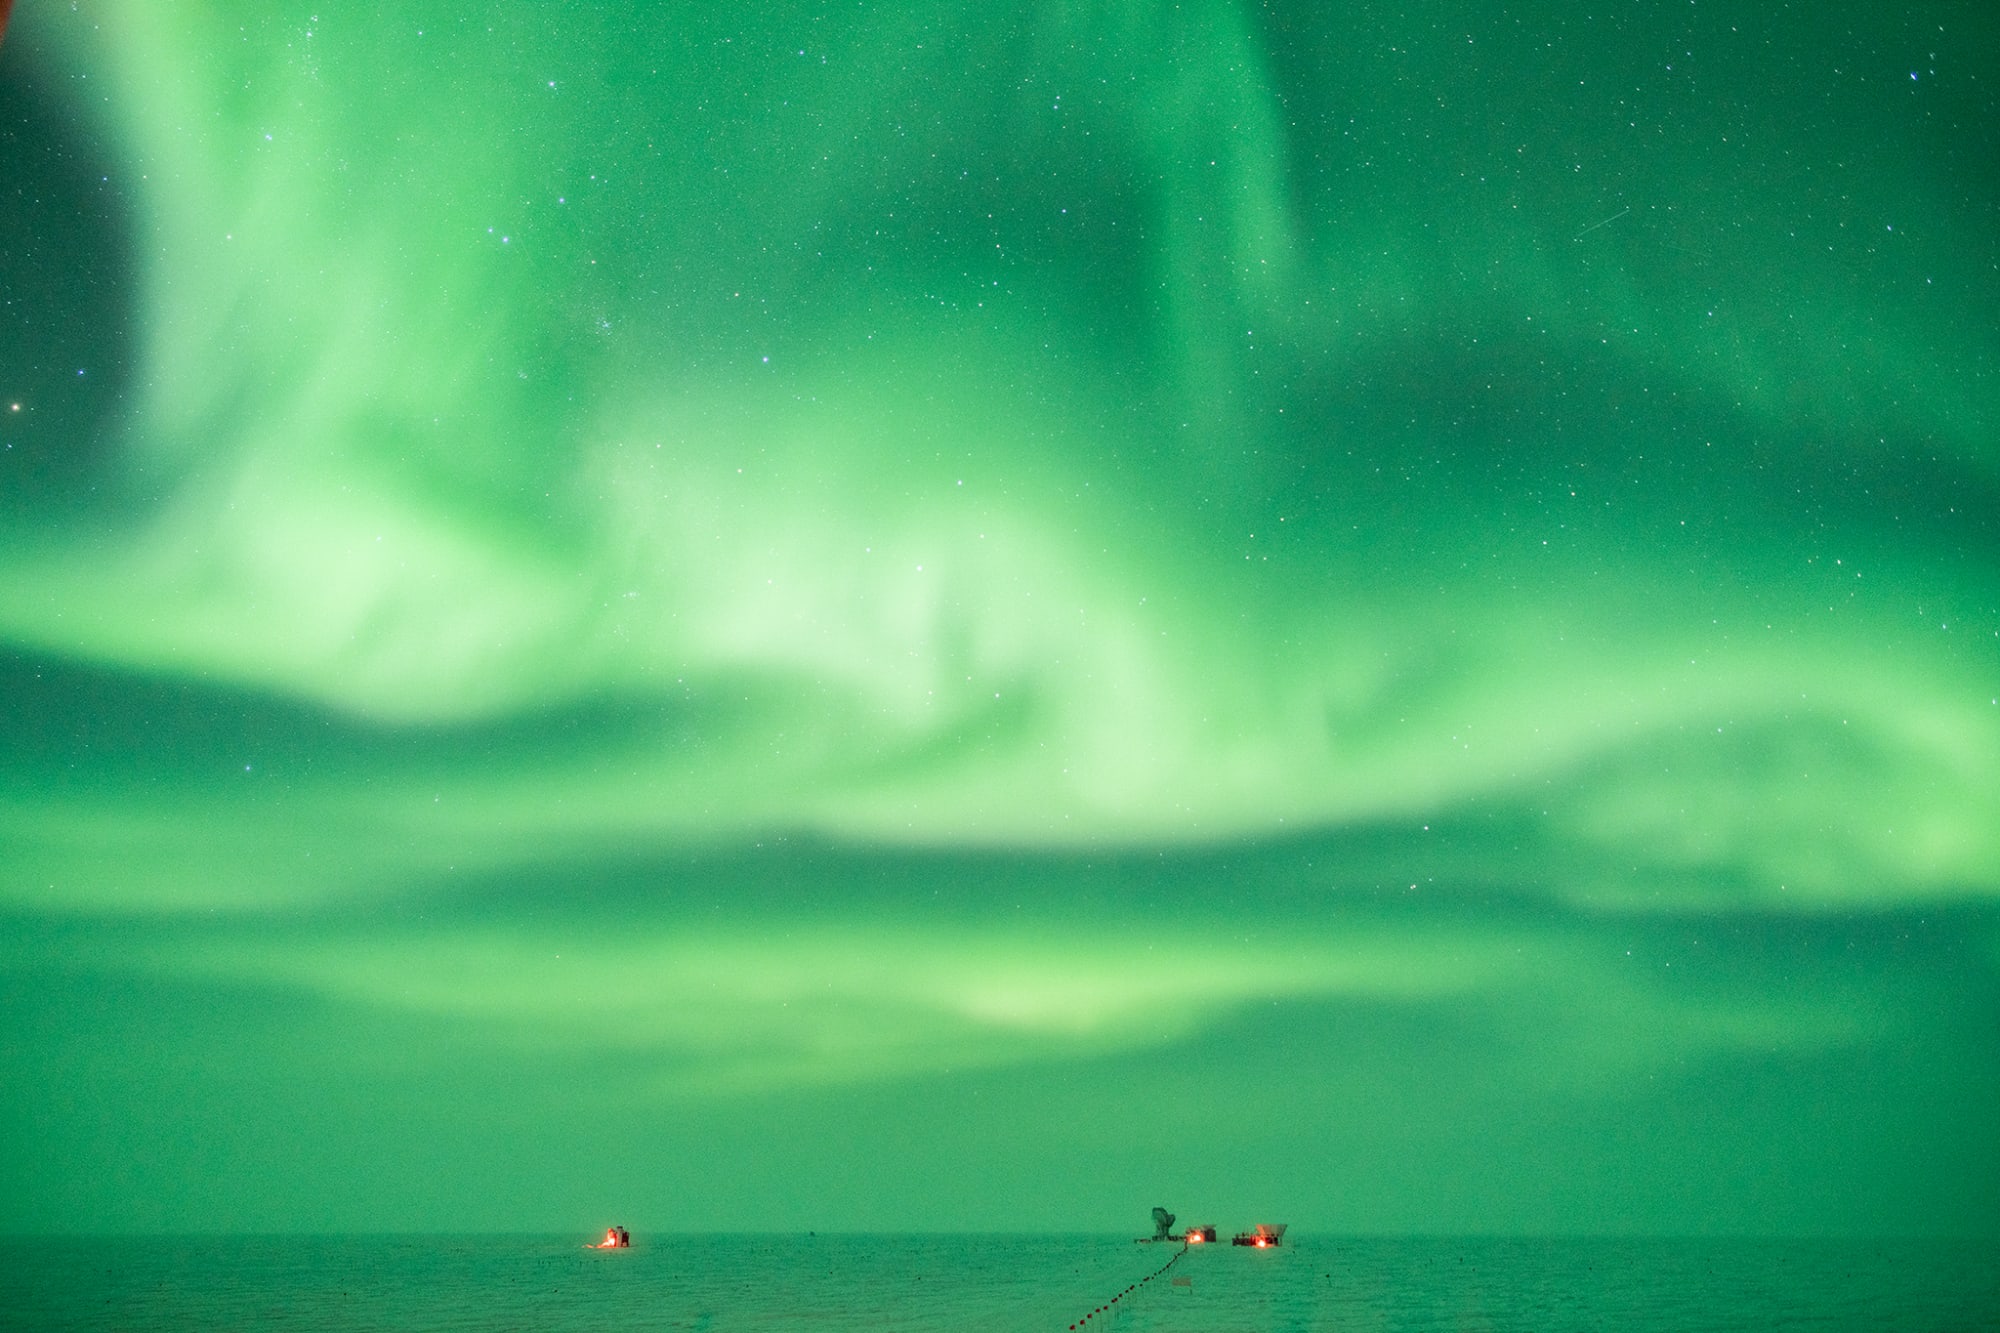 A supercharged aurora australis above the South Pole during a geomagnetic storm.